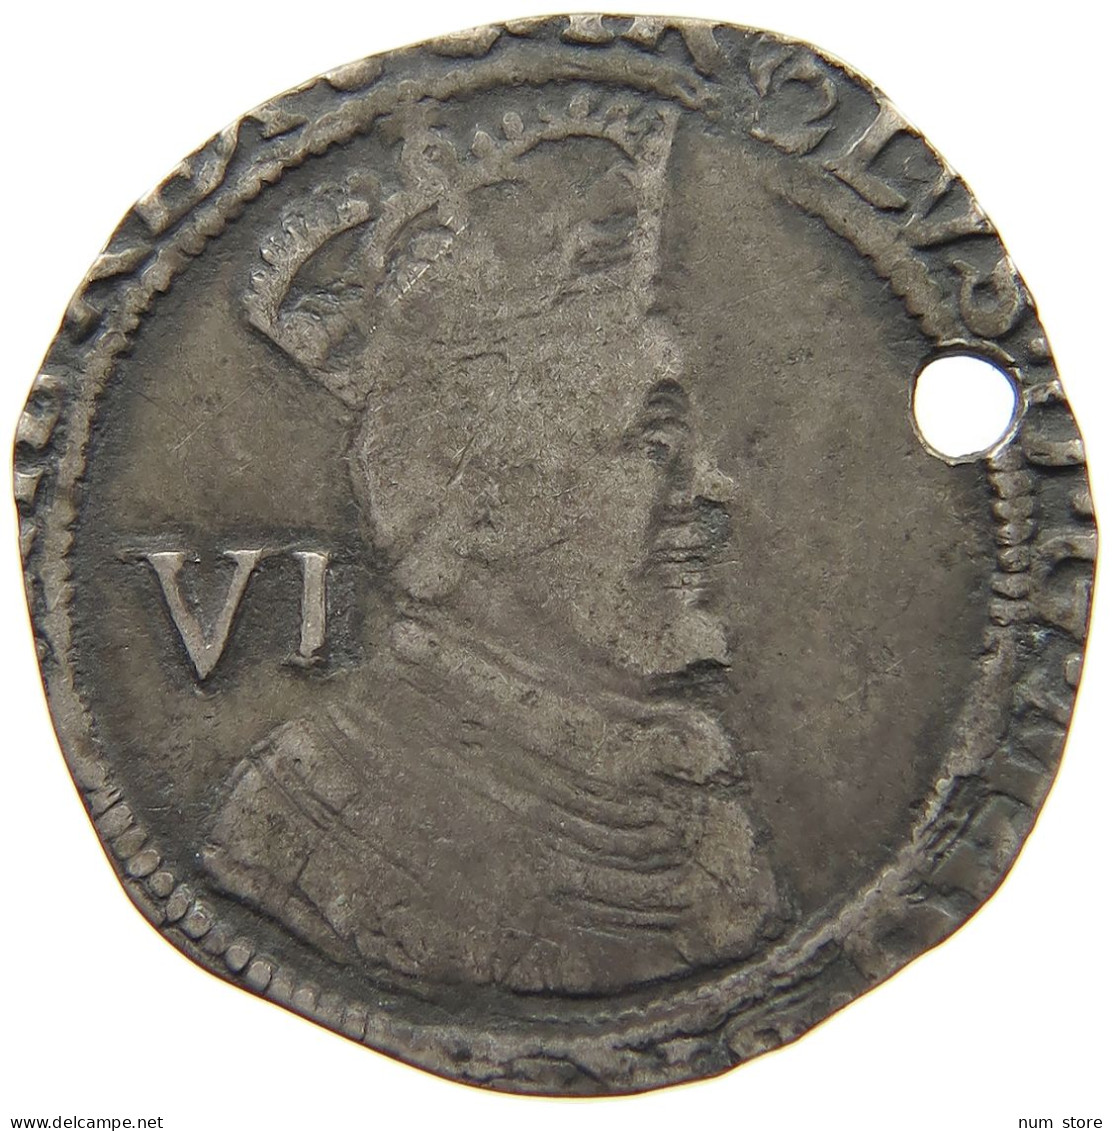 SCOTLAND 6 SHILLIGNS 1625 CHARLES I. 1625-1649 6 SHILLIGNS 1625 VERY RARE CUTTED #t006 0161 - Scottish